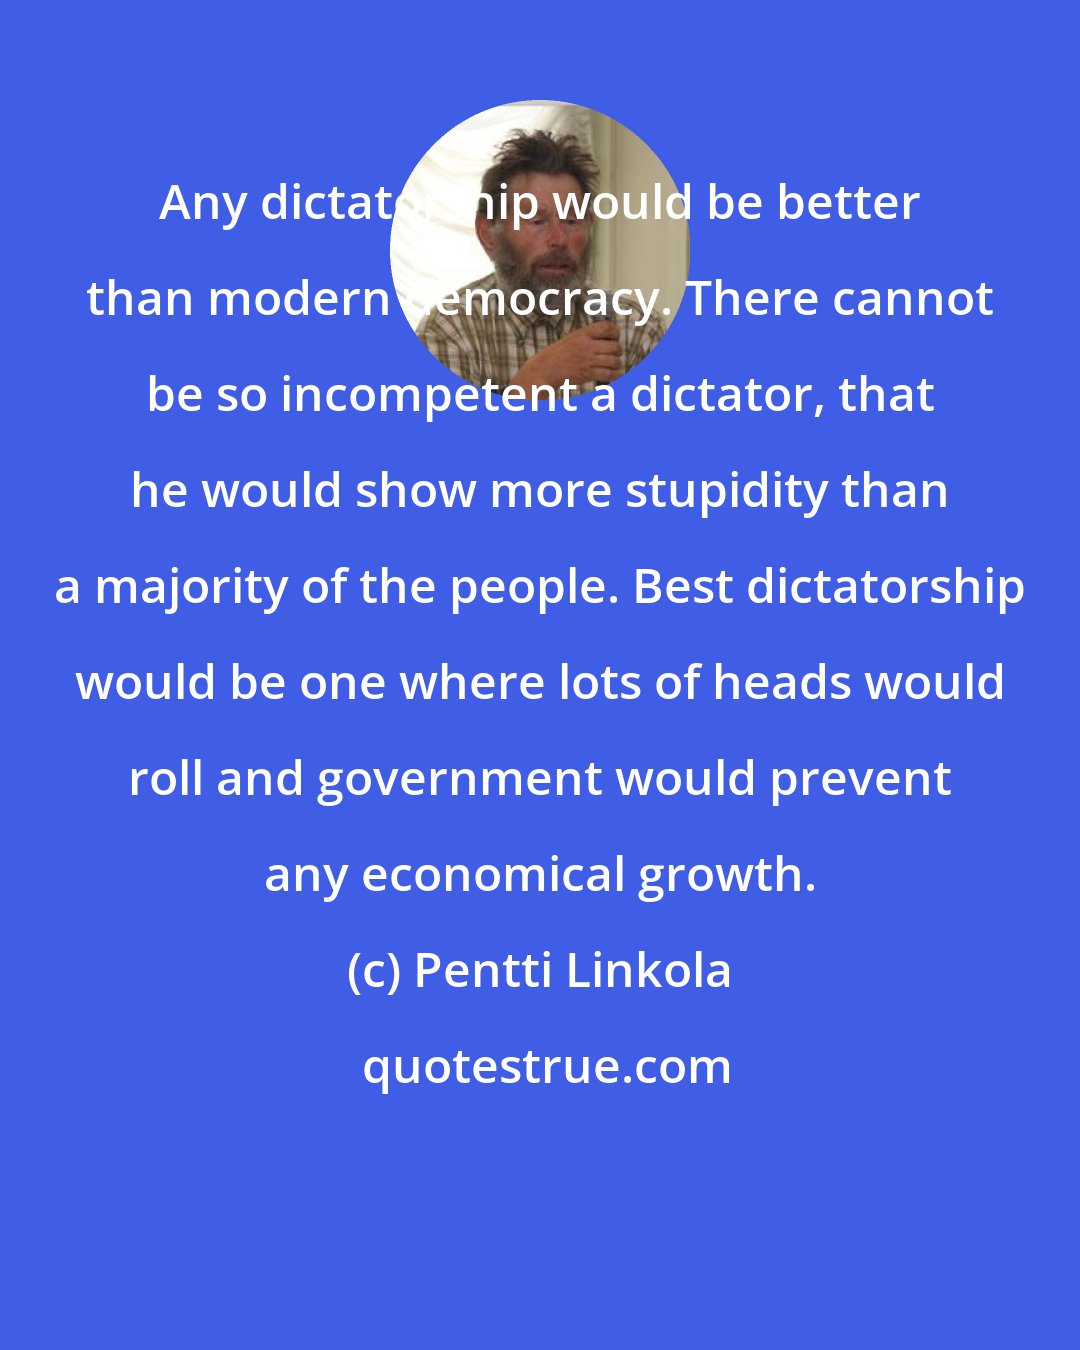 Pentti Linkola: Any dictatorship would be better than modern democracy. There cannot be so incompetent a dictator, that he would show more stupidity than a majority of the people. Best dictatorship would be one where lots of heads would roll and government would prevent any economical growth.